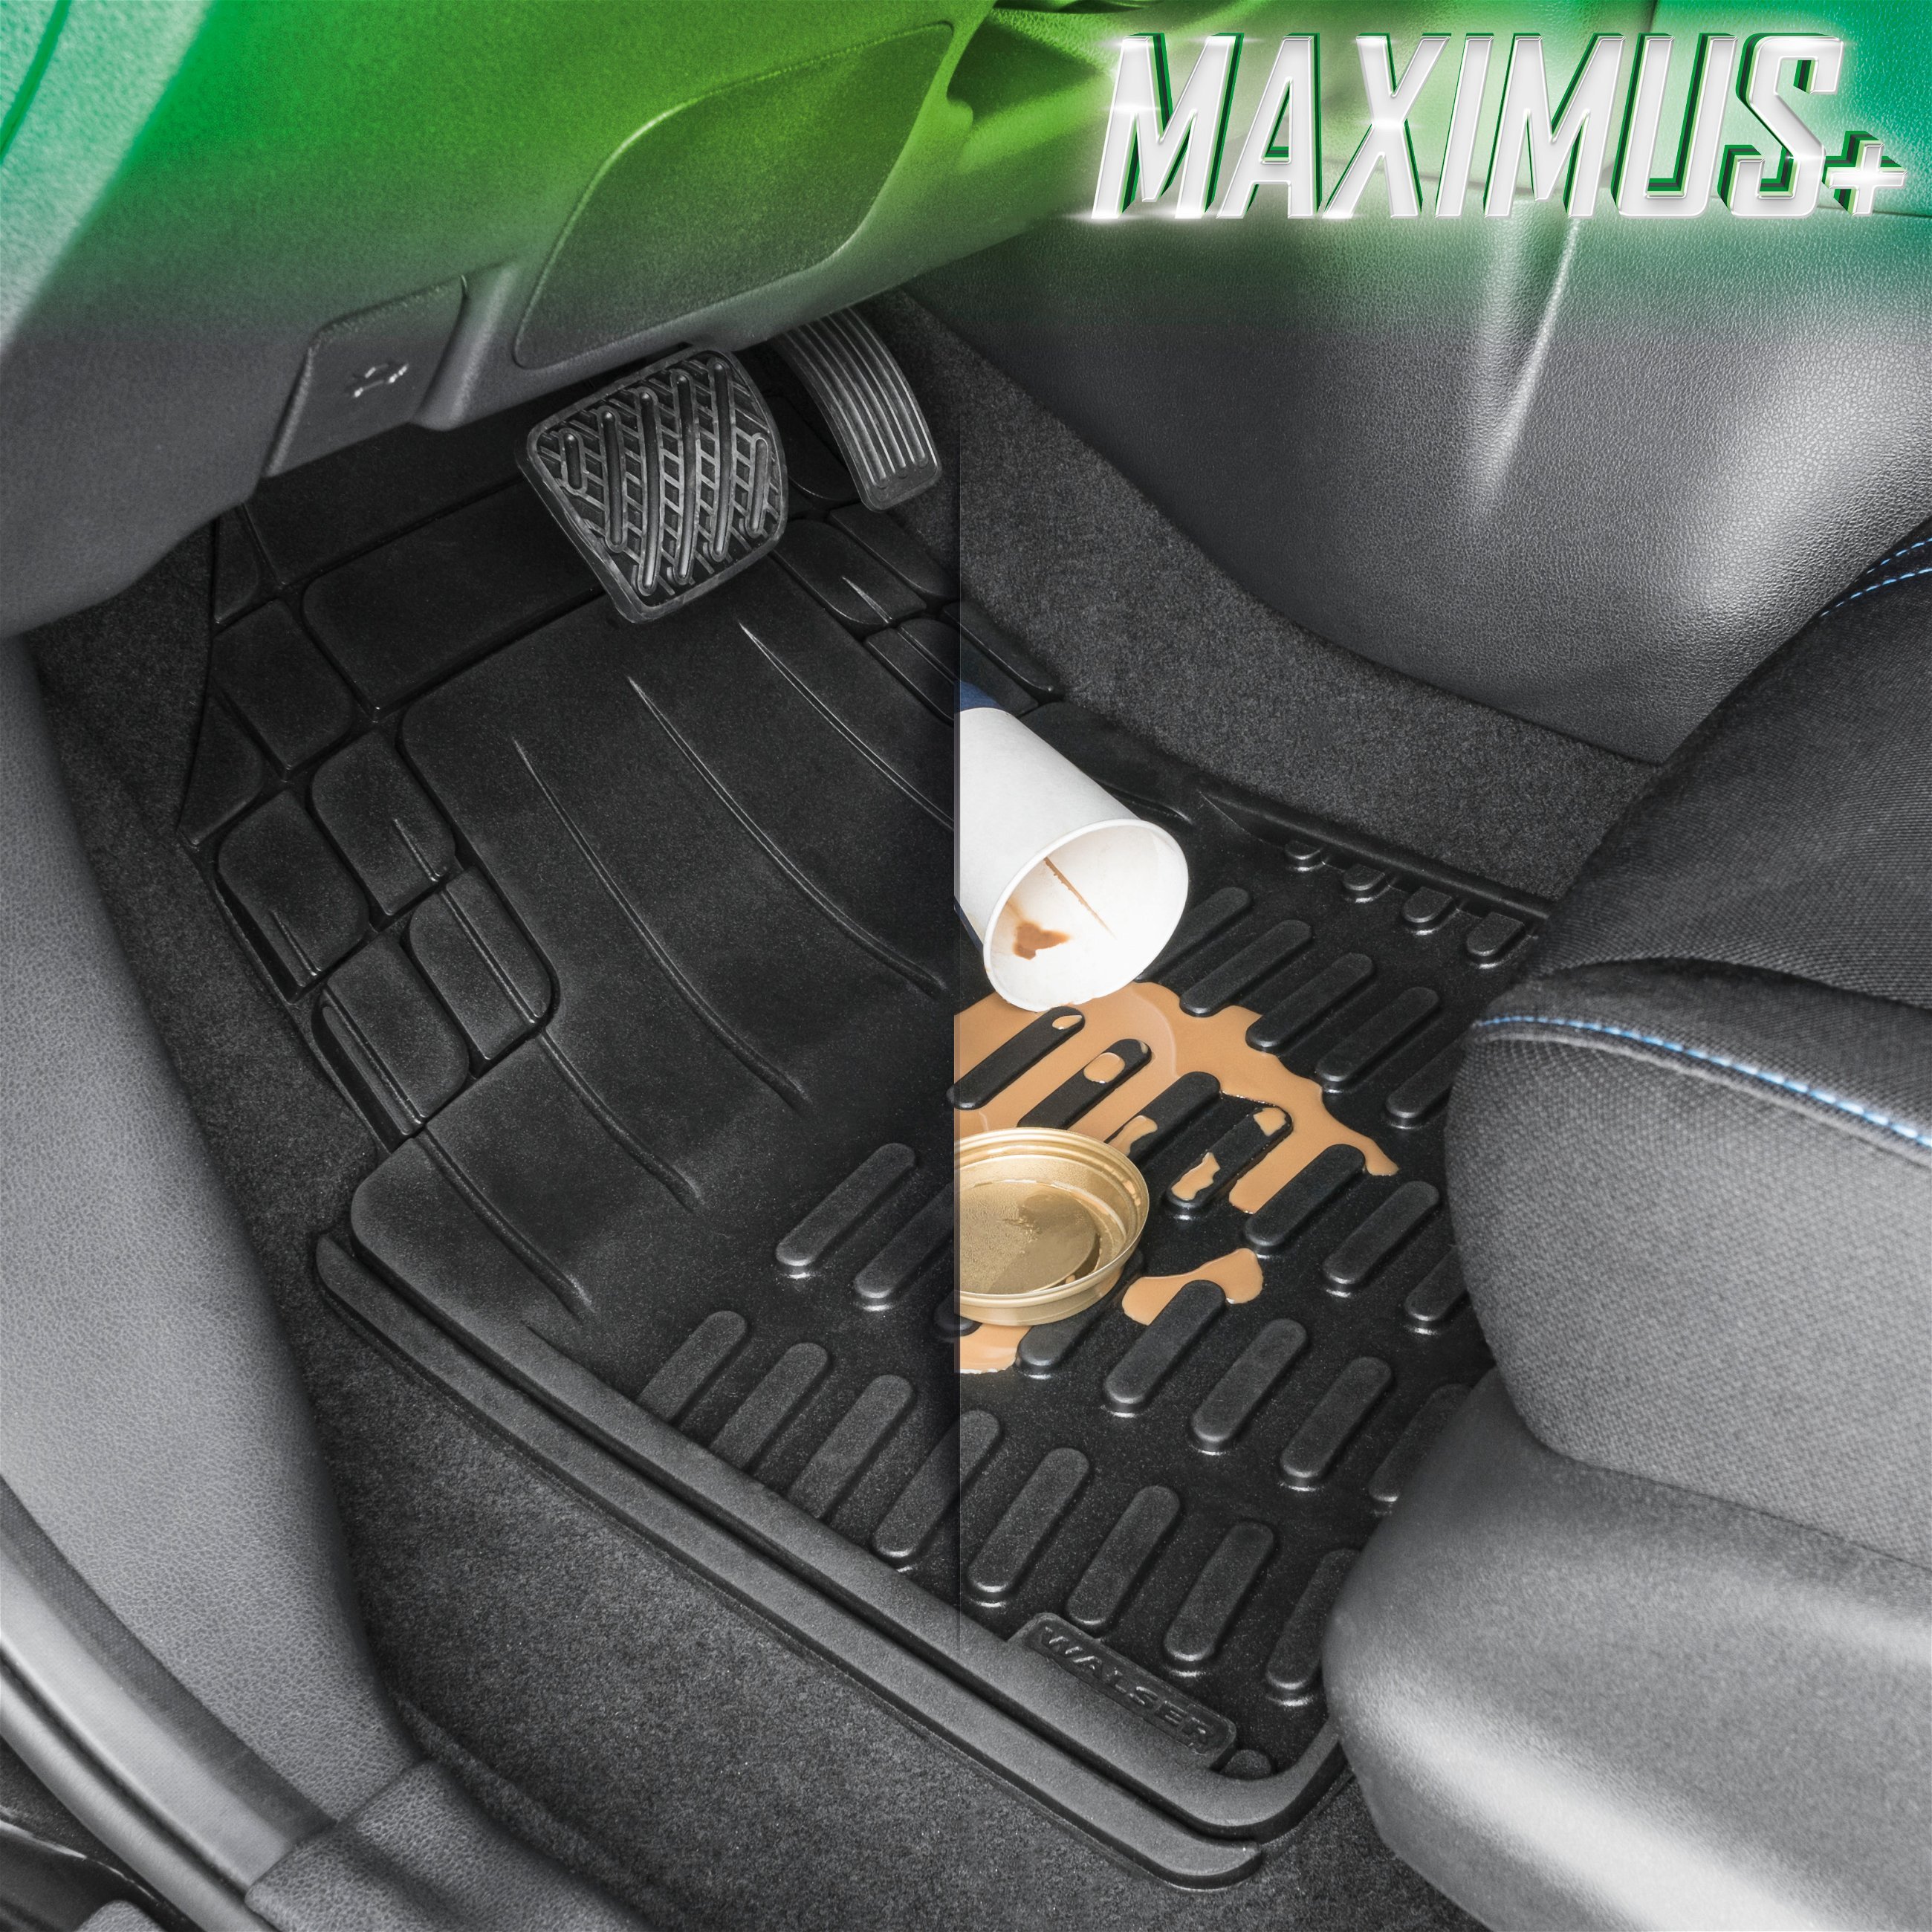 Rubber mats for Maximus Plus, can be cut to size